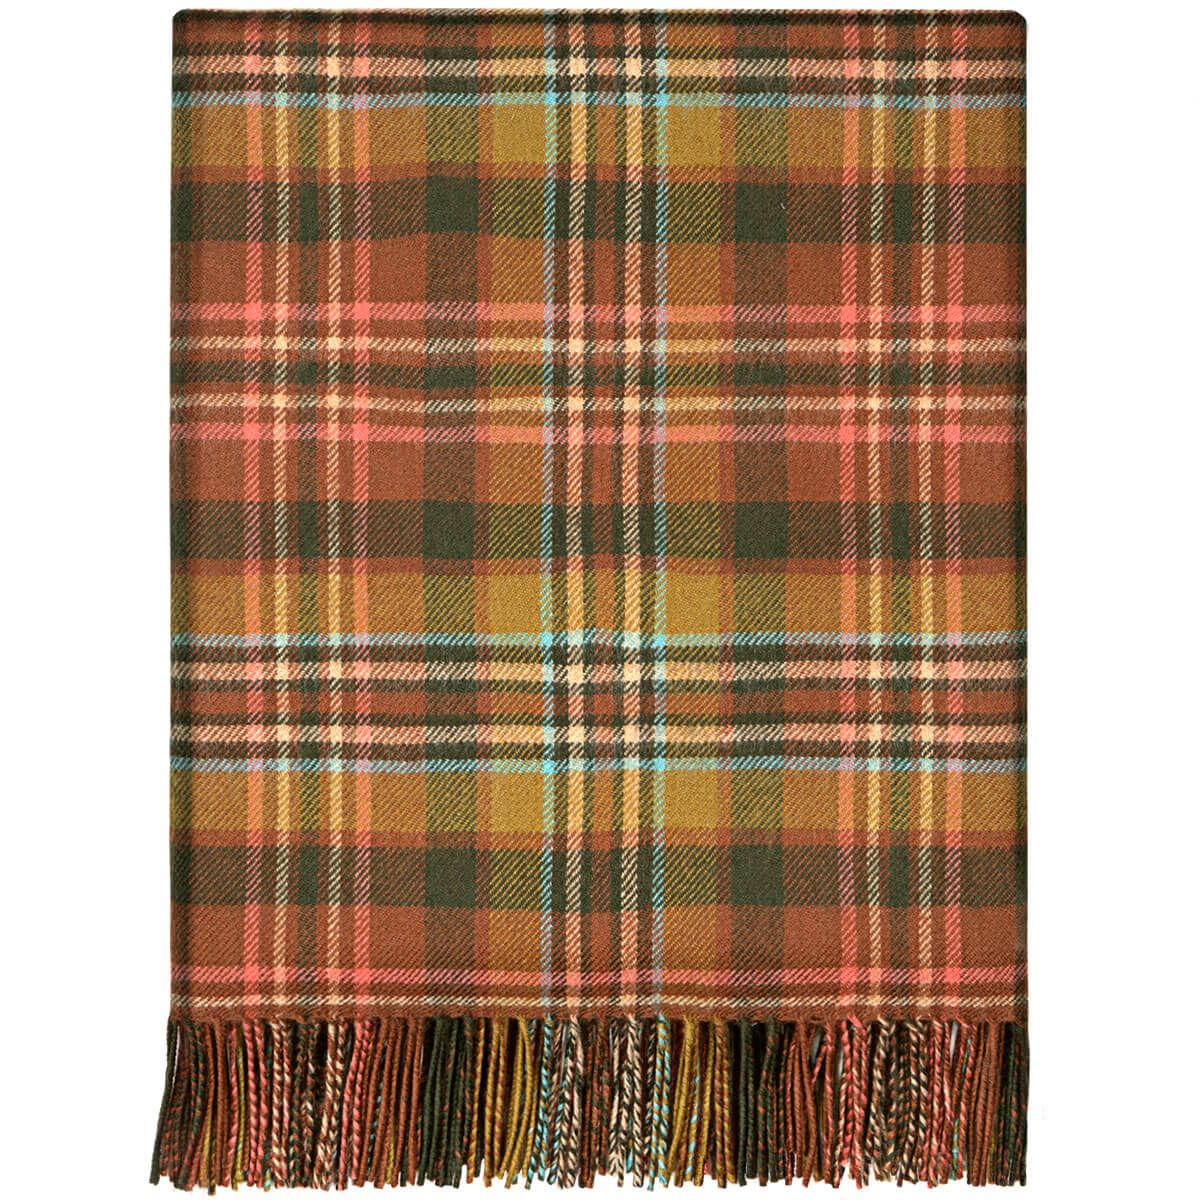 Scott Green Antique Lambswool Blanket - Click Image to Close